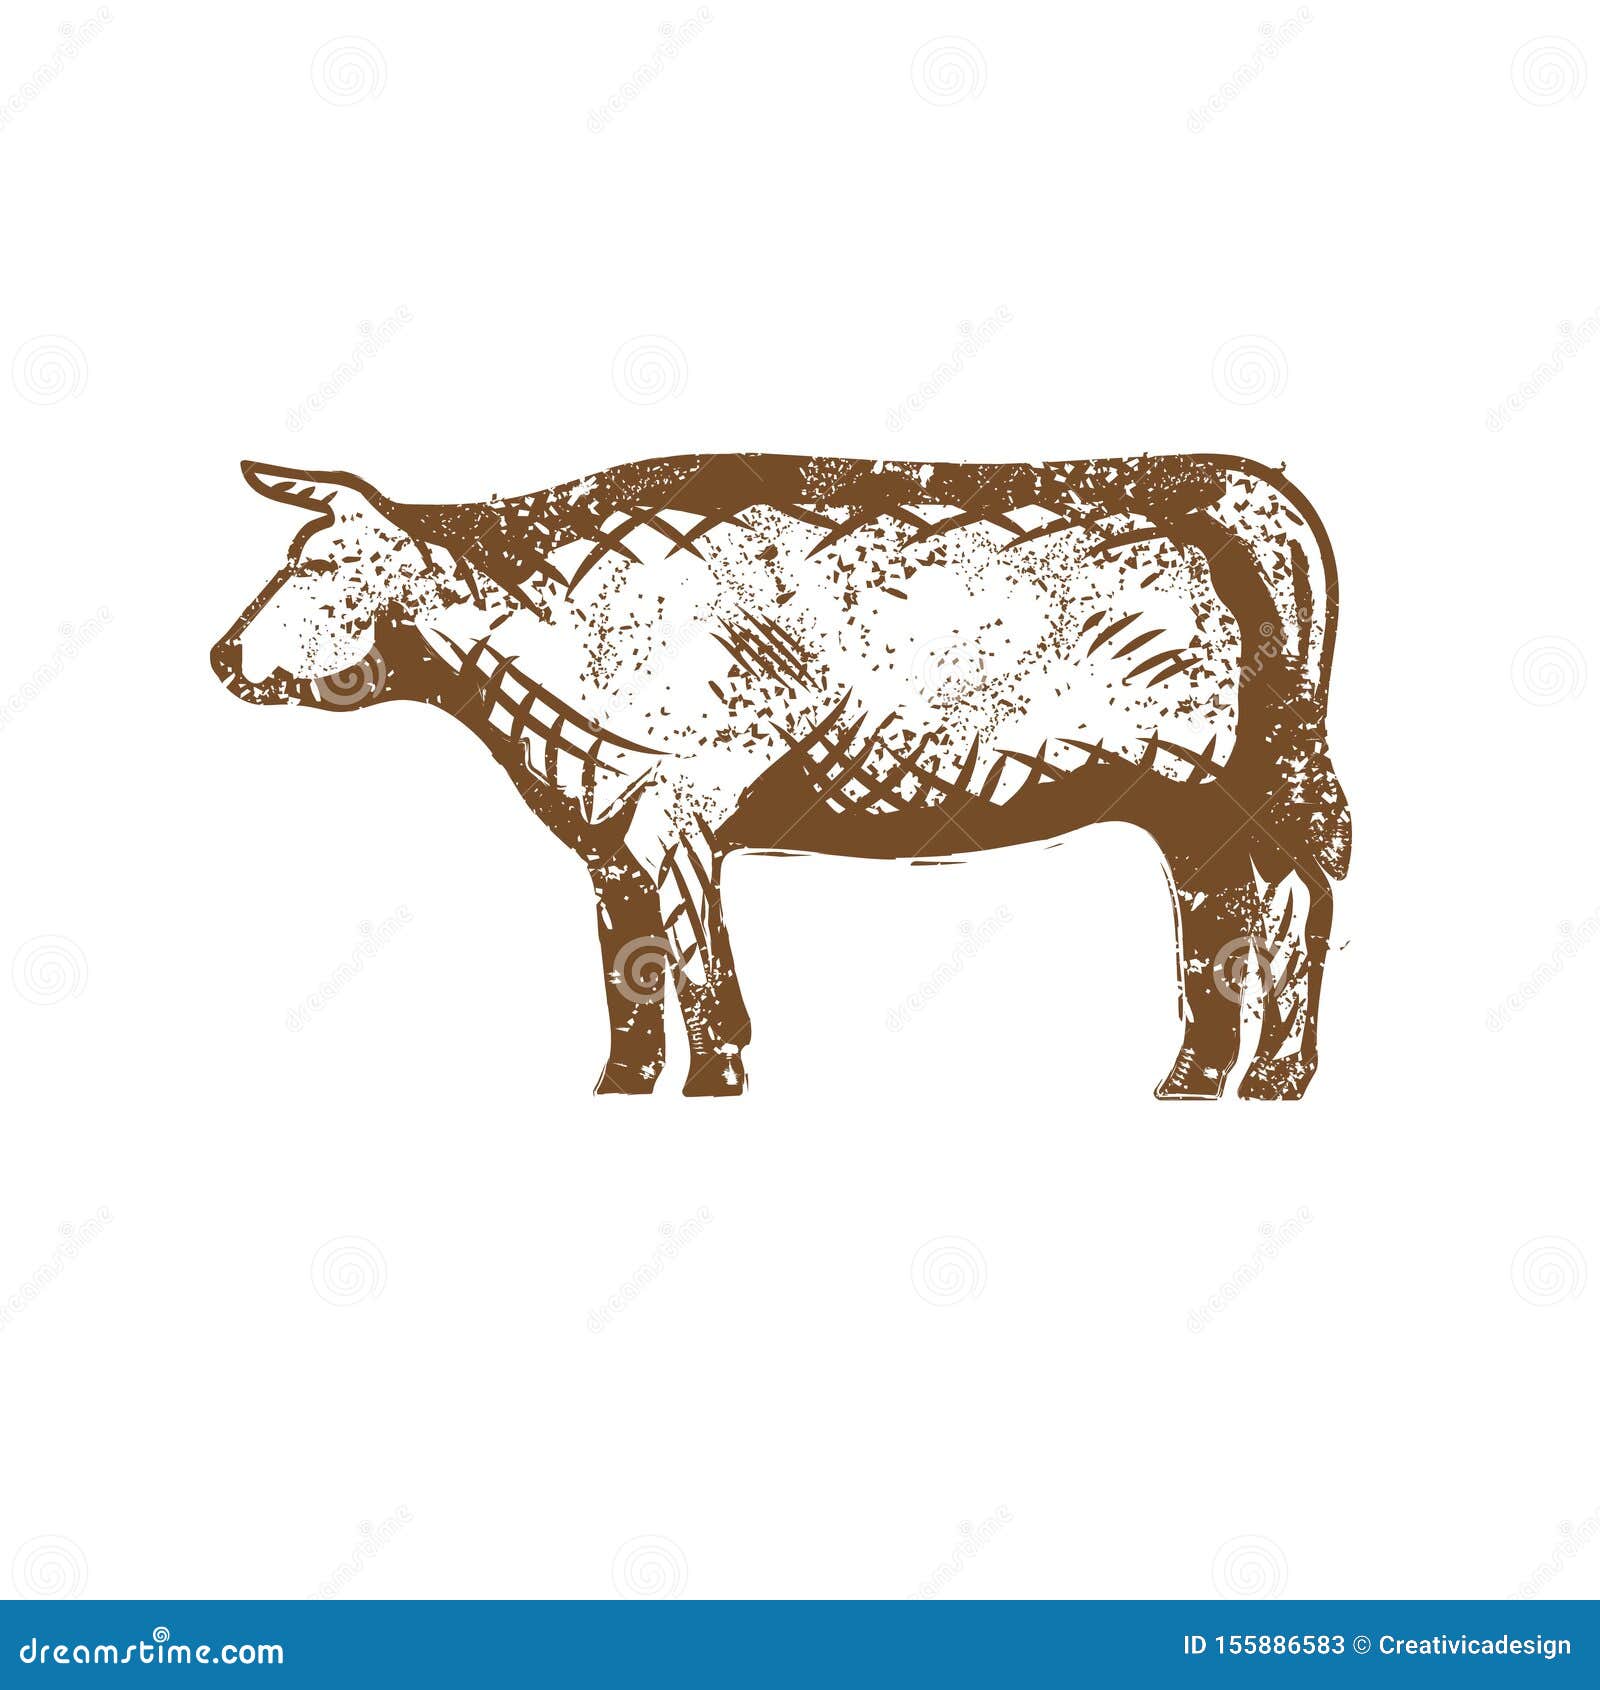 cow or cattle clip art in intage style